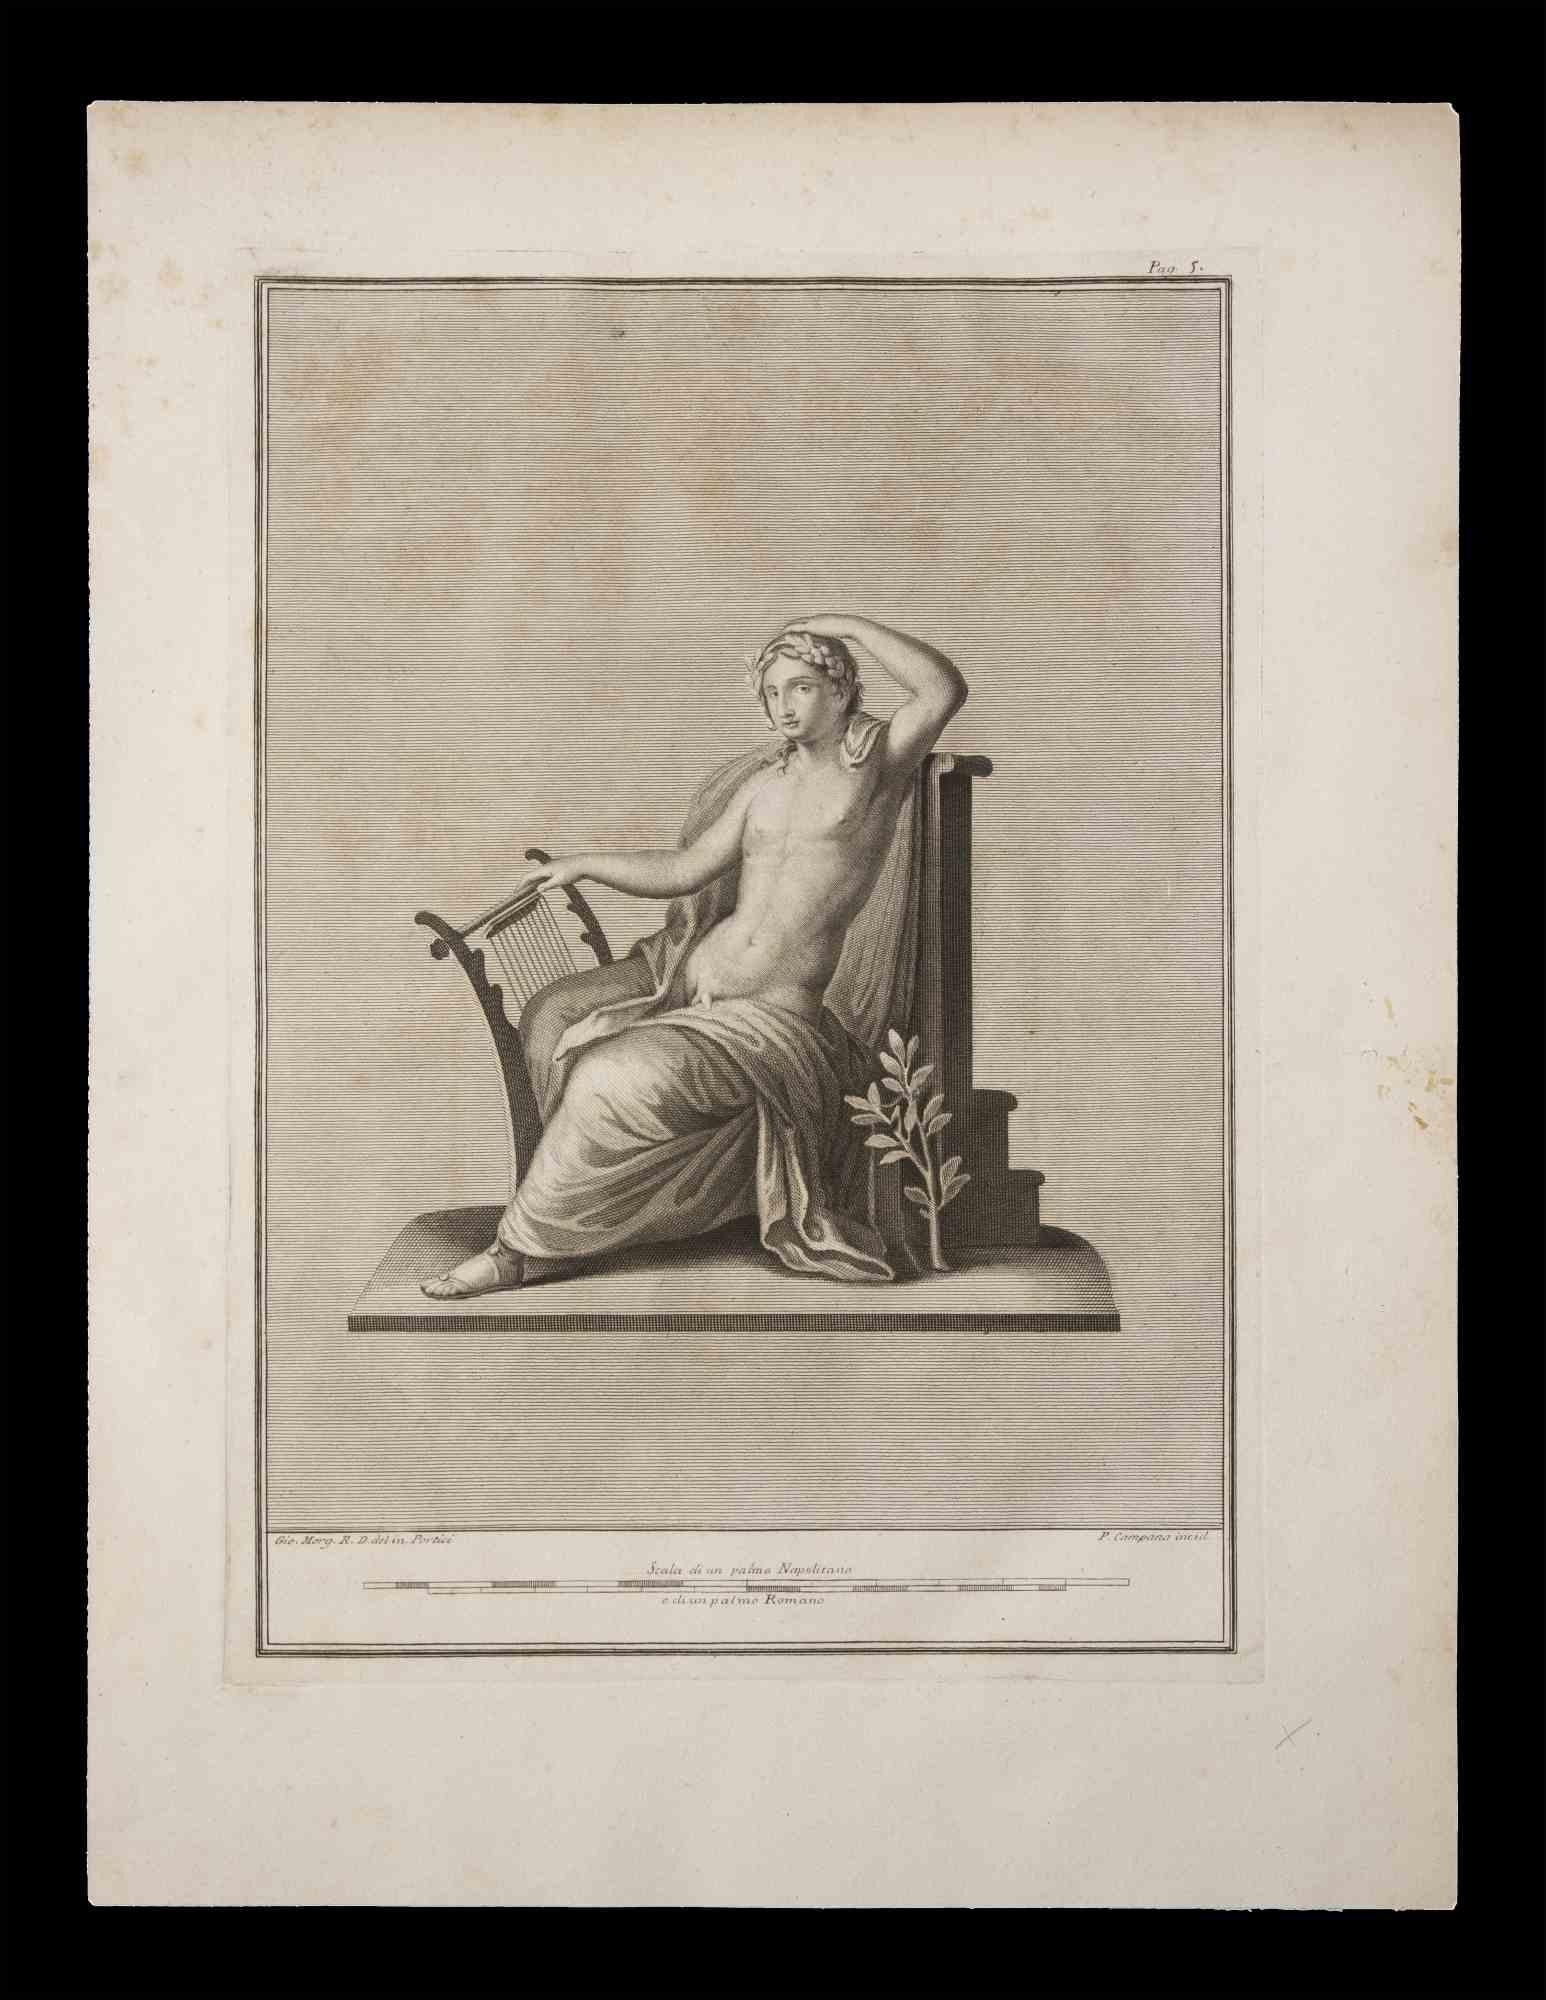 Ancient Roman Statue, from the series "Antiquities of Herculaneum", is an original etching on paper realized by P. Campana in the 18th century.

Signed on the plate, on the lower right.

Good conditions with minor stain and foxing.

The etching